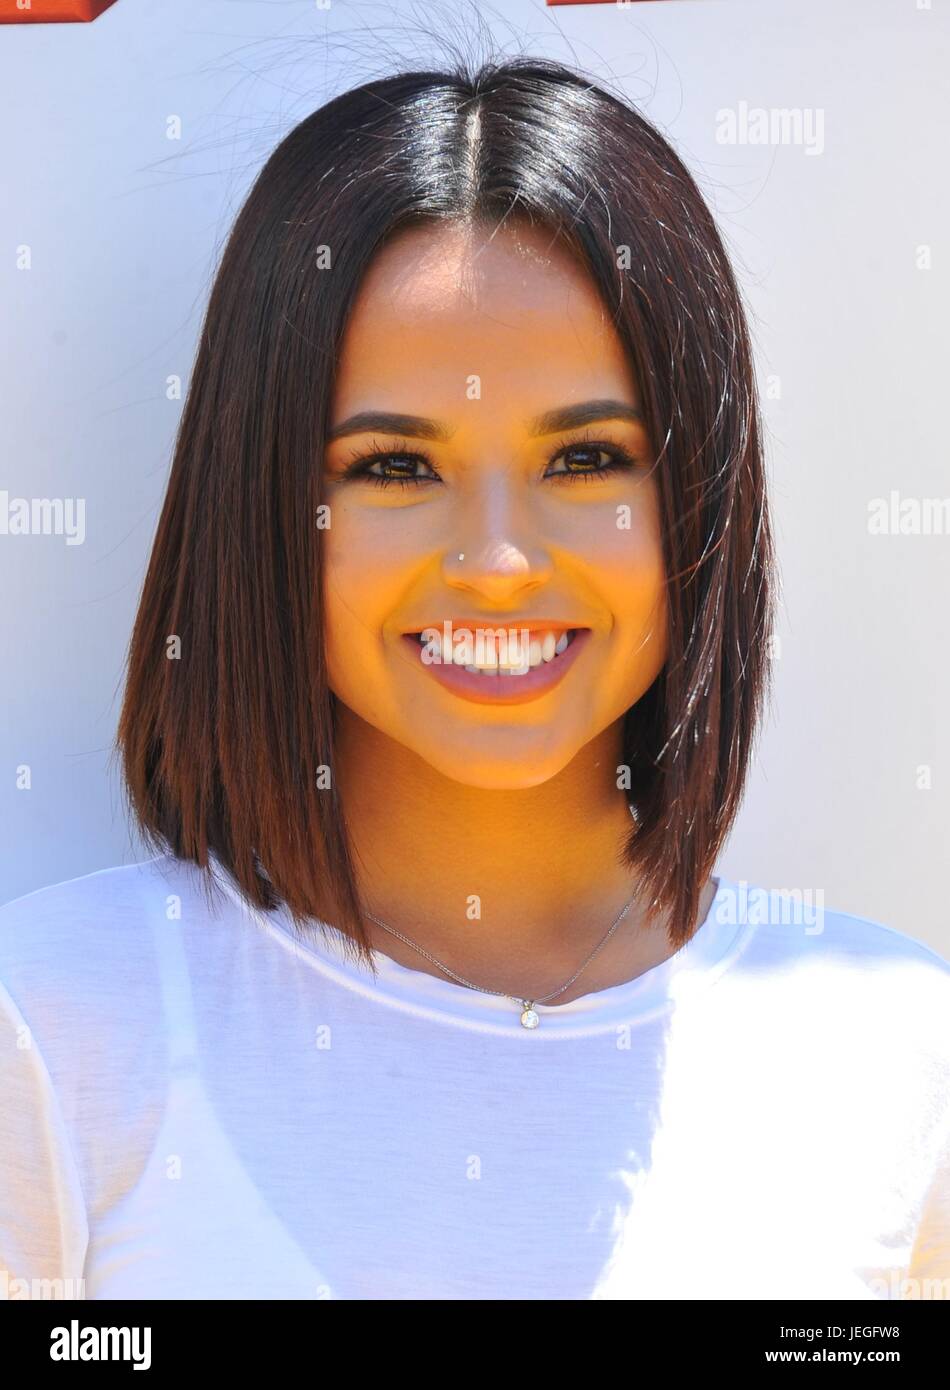 Los Angeles, USA. 24th June, 2017. Becky G at arrivals for DESPICABLE ME 3 Premiere, Shrine Auditorium, Los Angeles, CA June 24, 2017. Credit: Dee Cercone/Everett Collection/Alamy Live News Stock Photo